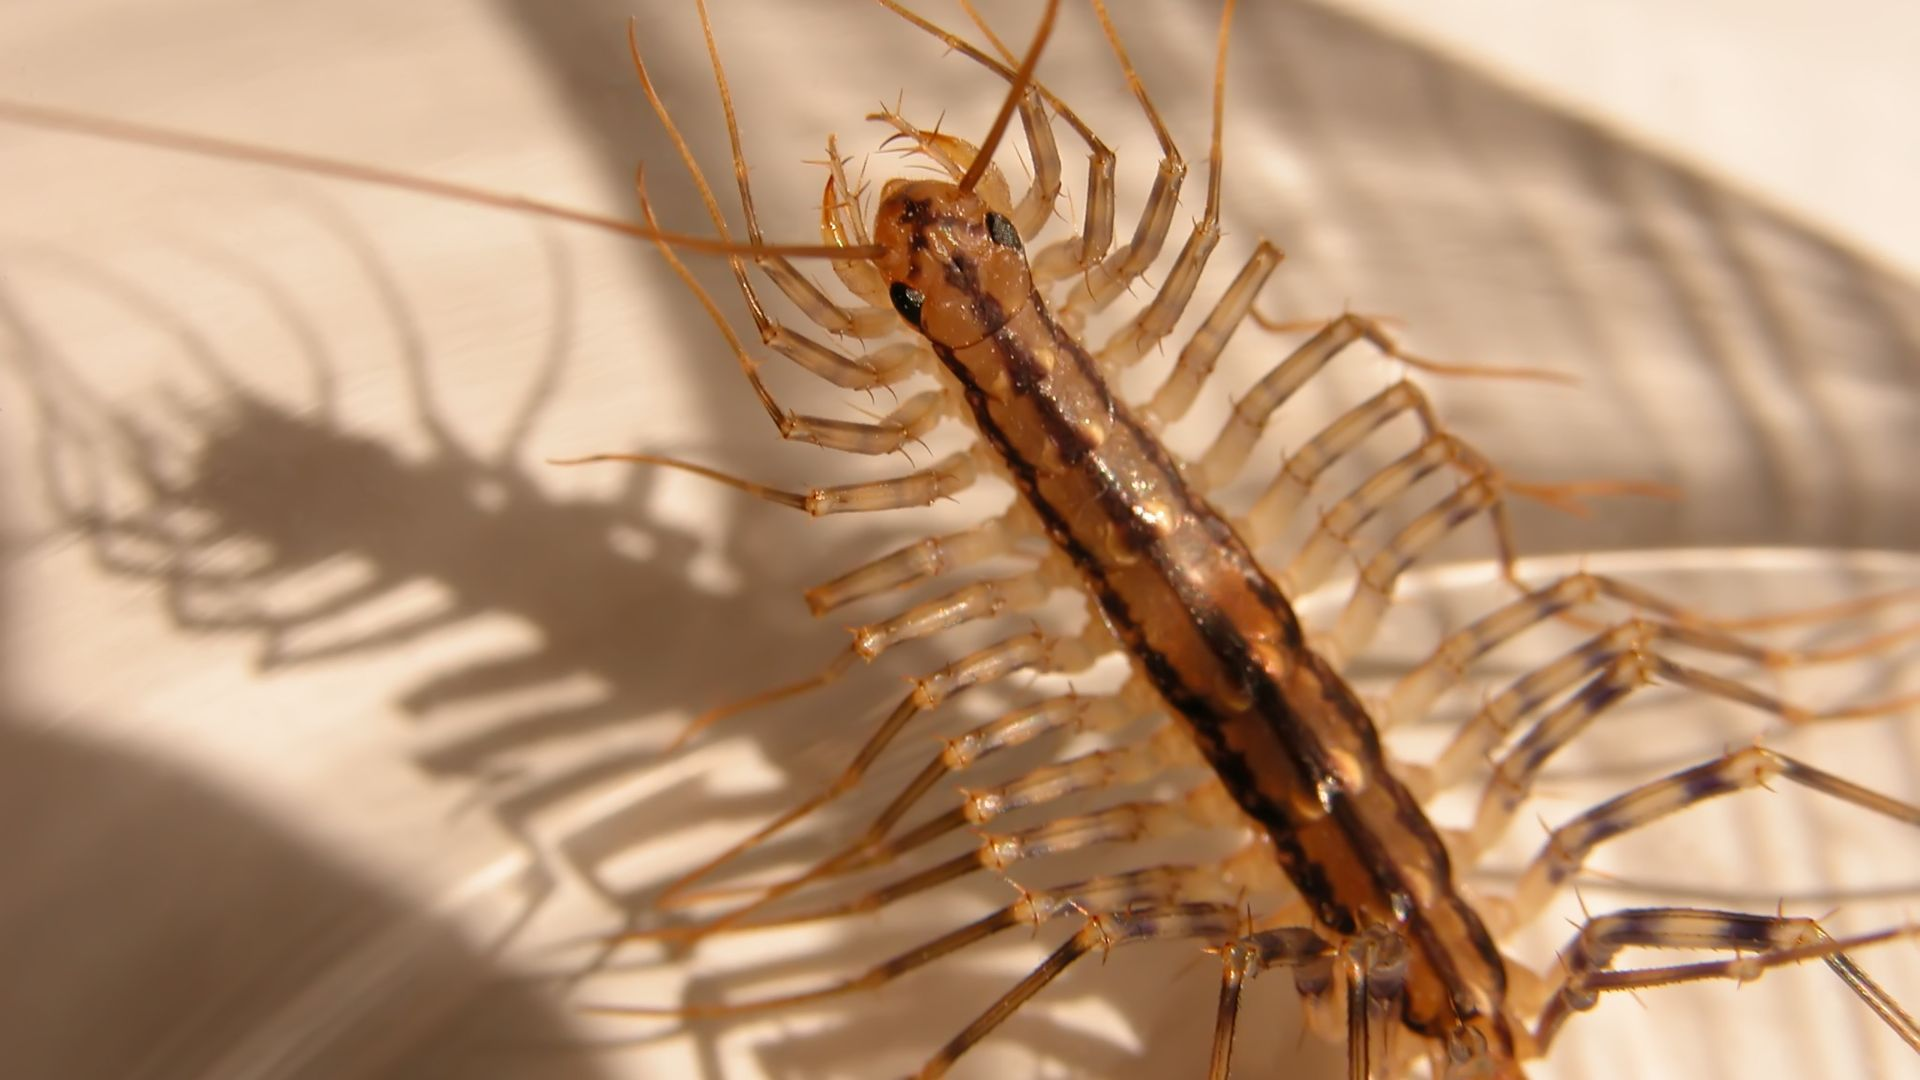 An image of a house centipede showing its three dark stripes.